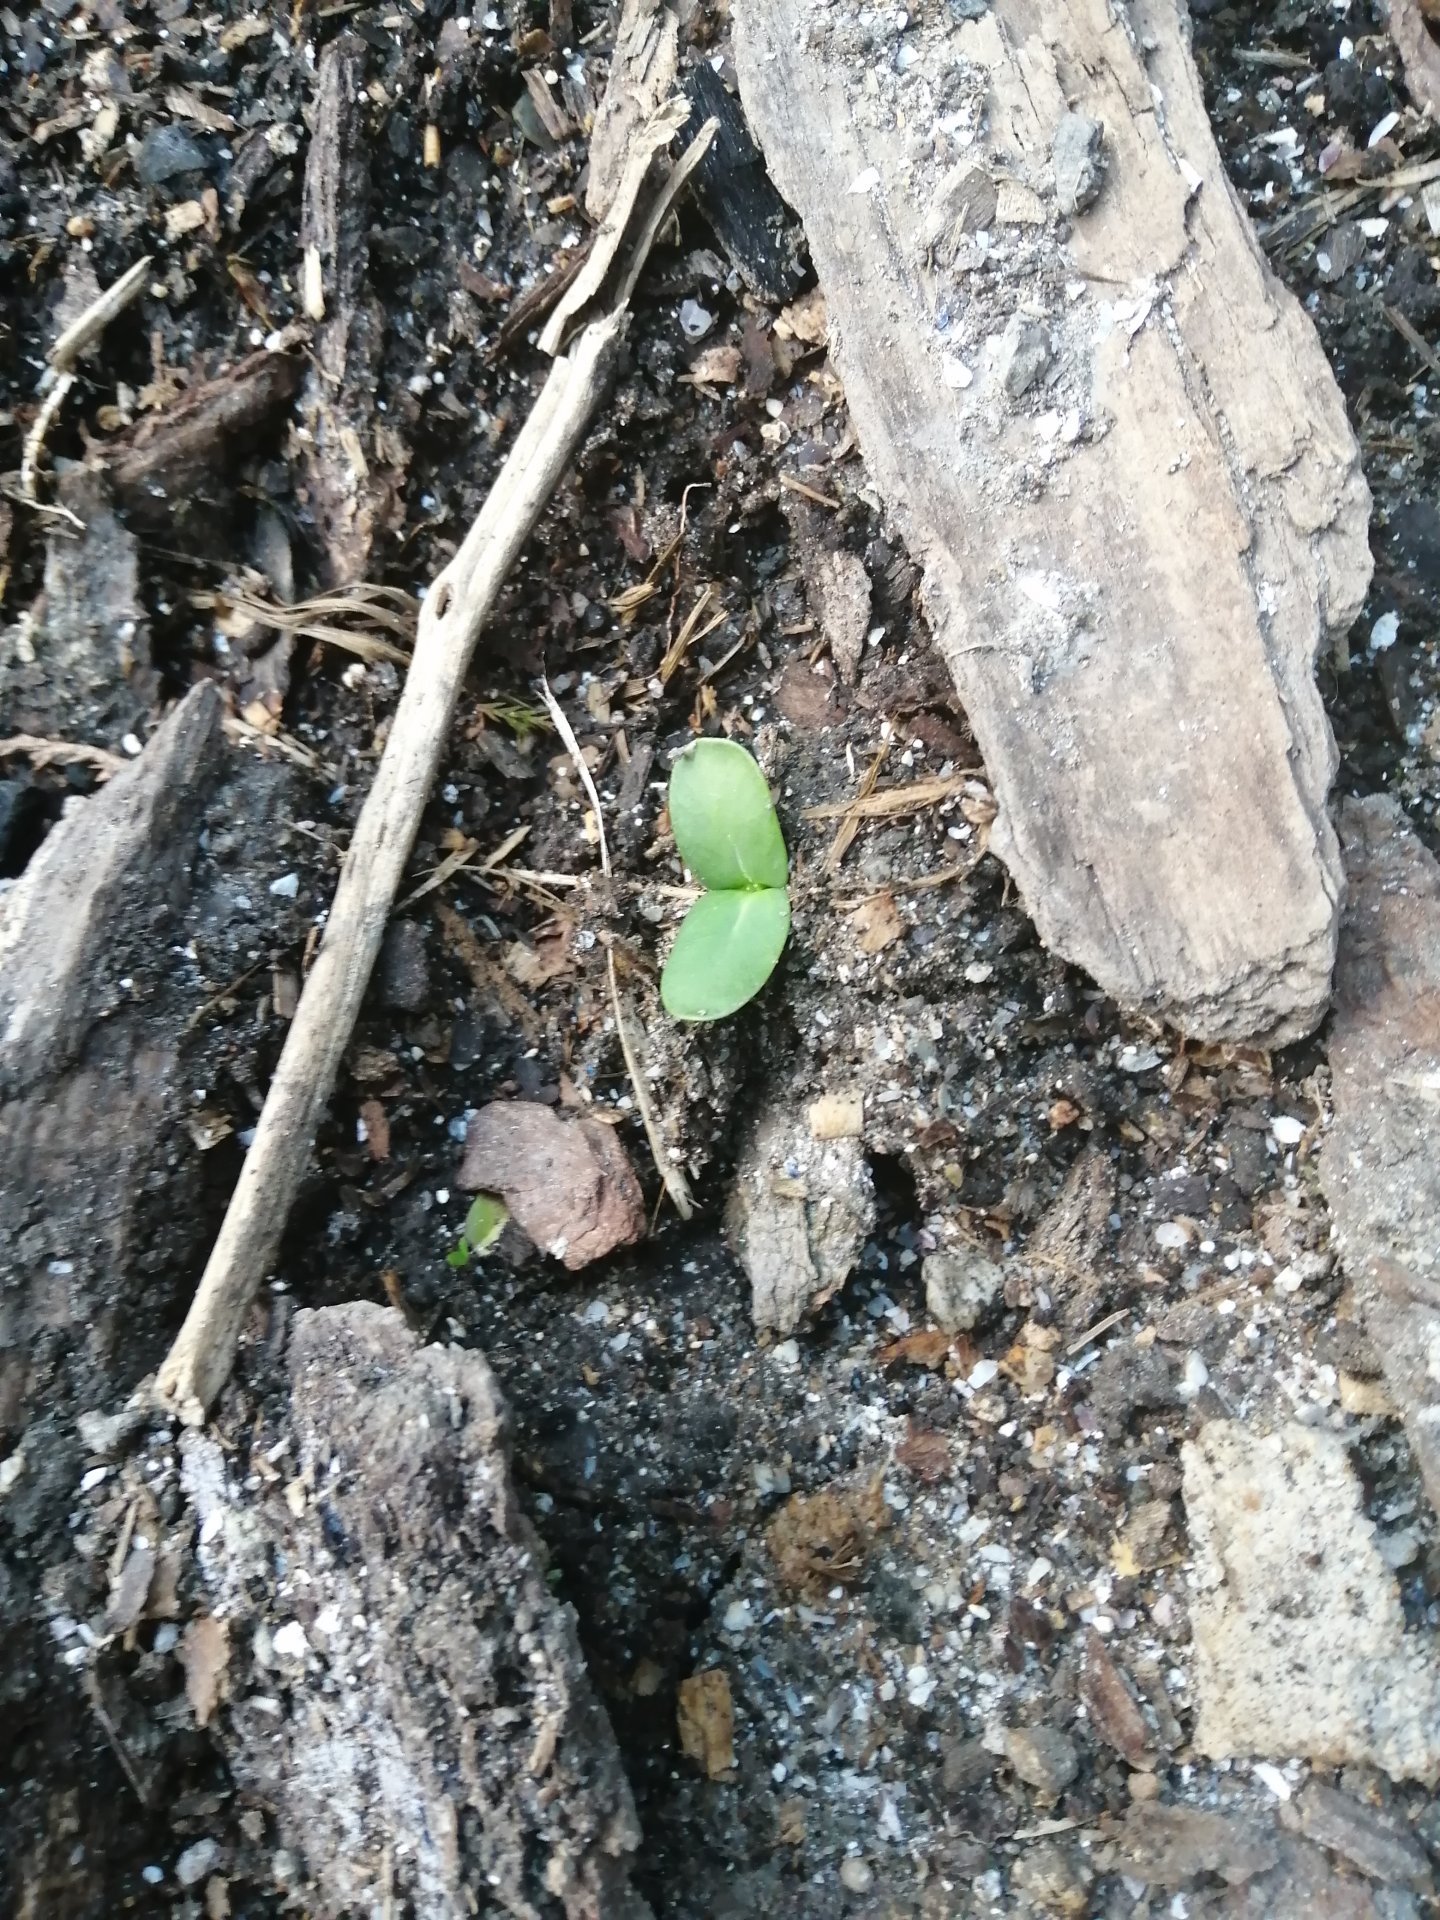 First sunflowers are sprouting!